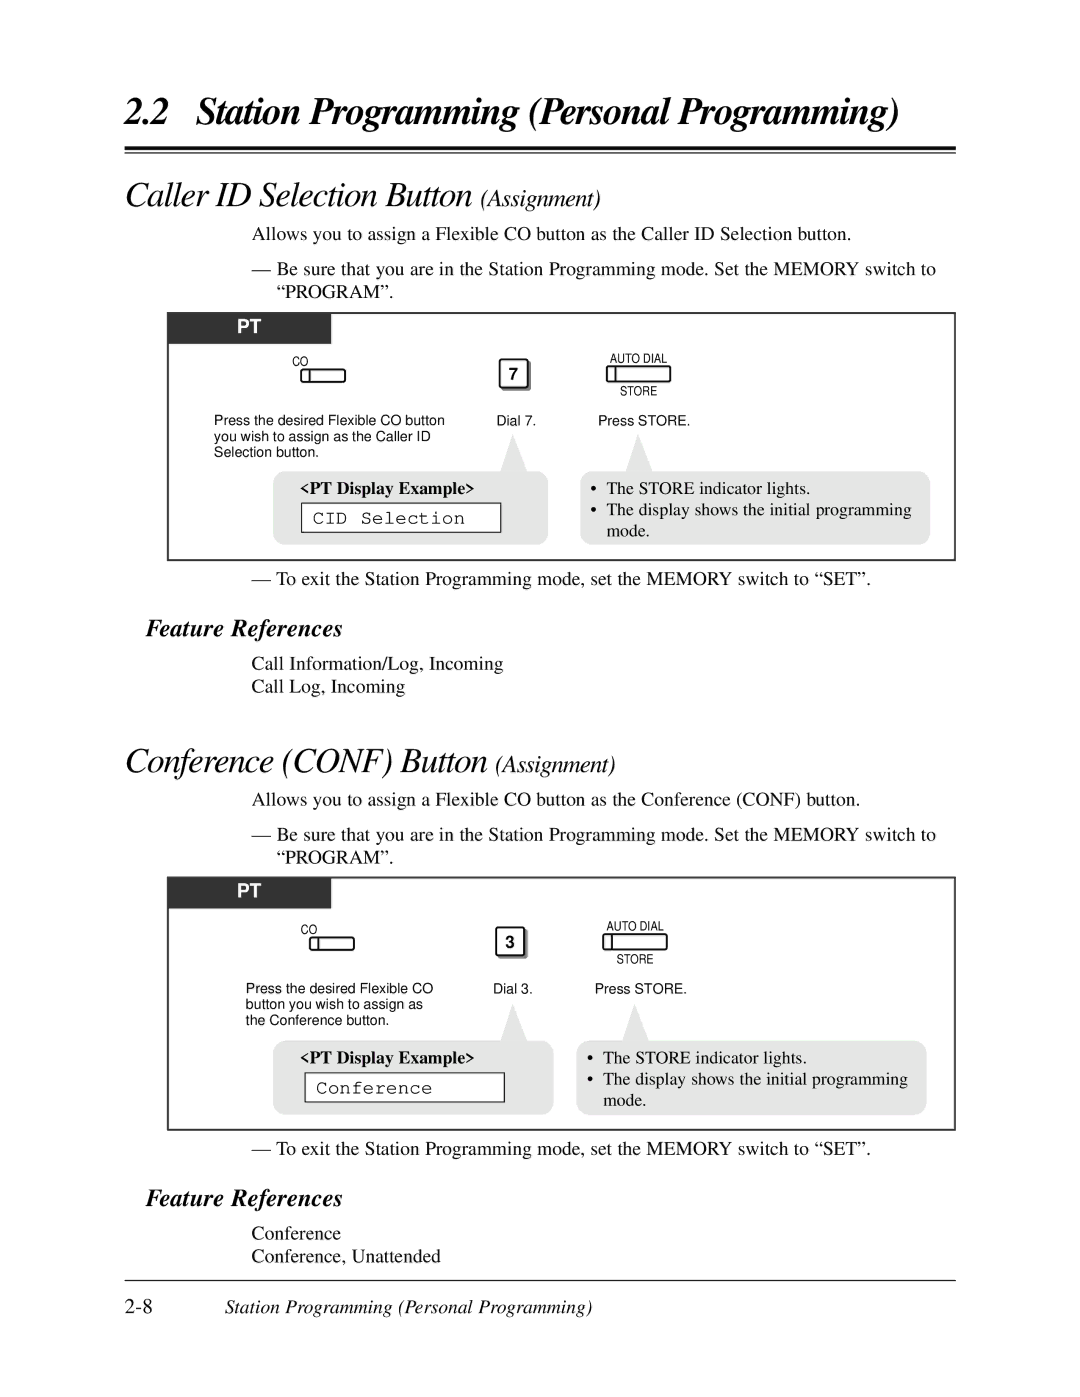 Panasonic KX-TA624 user manual Caller ID Selection Button Assignment, Conference Conf Button Assignment, CID Selection 